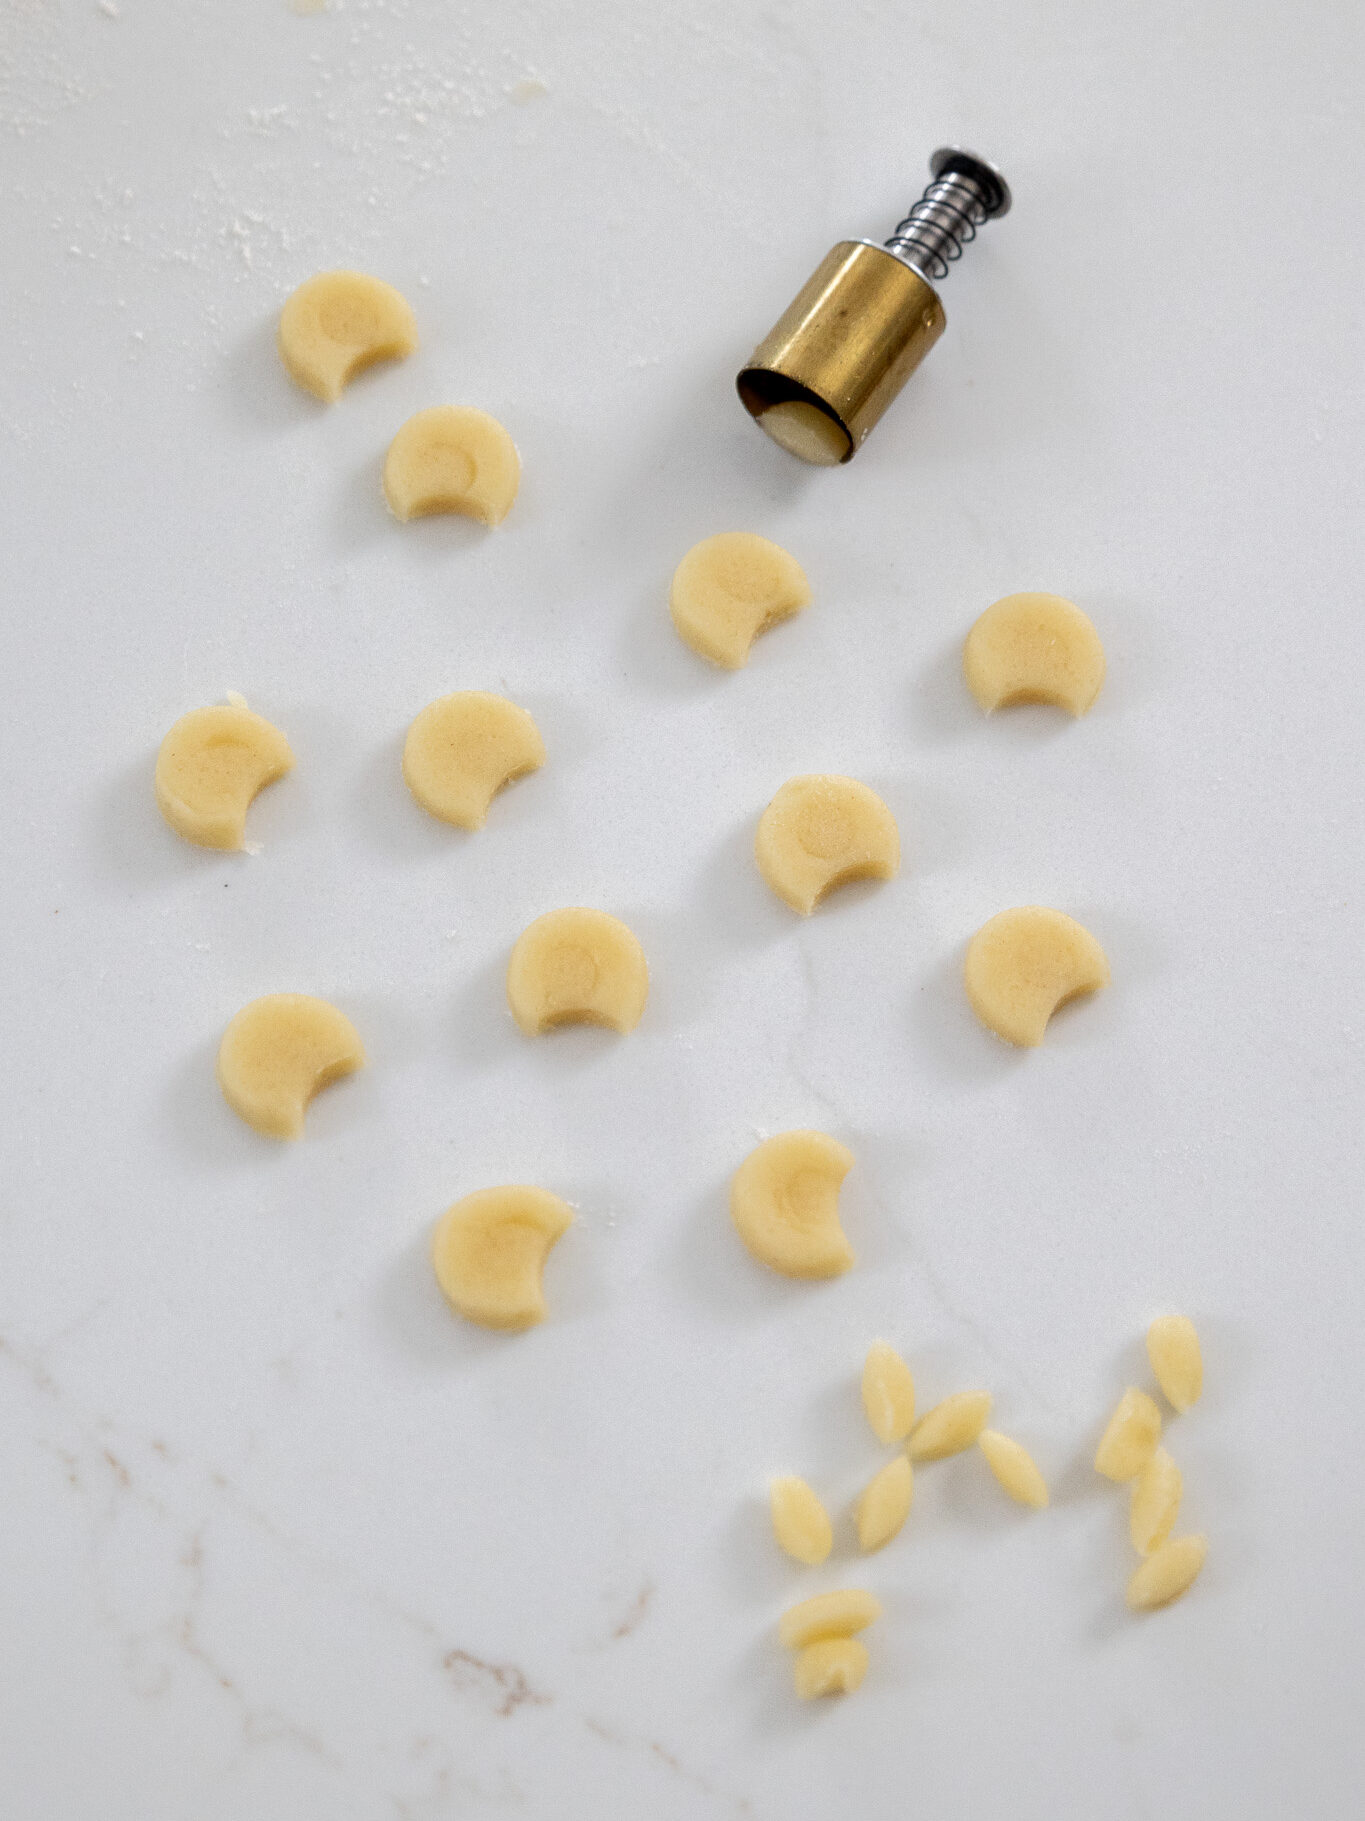 image of cookie dough being cut out to make ears for polar bear cookies